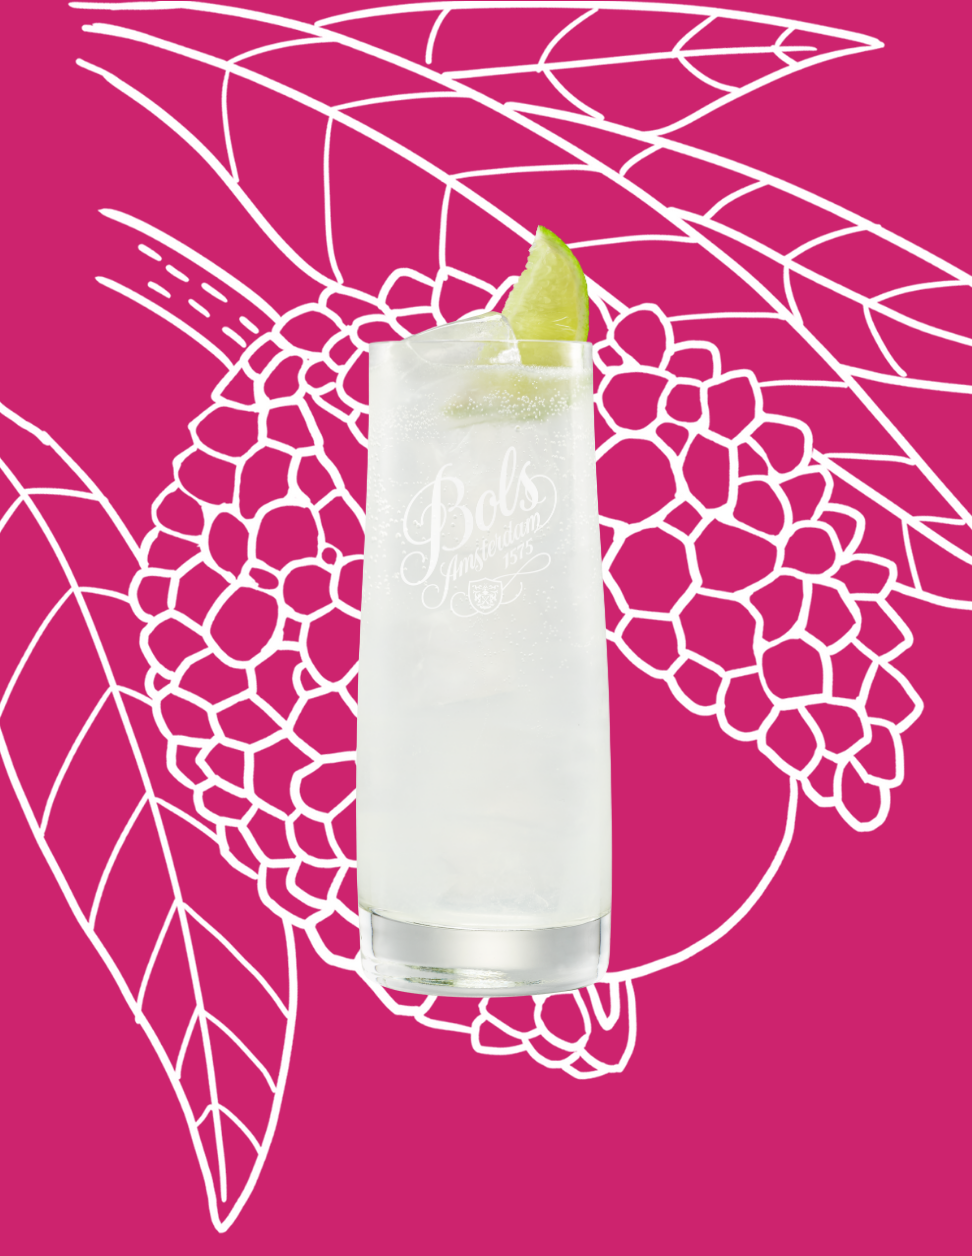 Lychee Rickey Cocktail Recipe with Bols Lychee Products